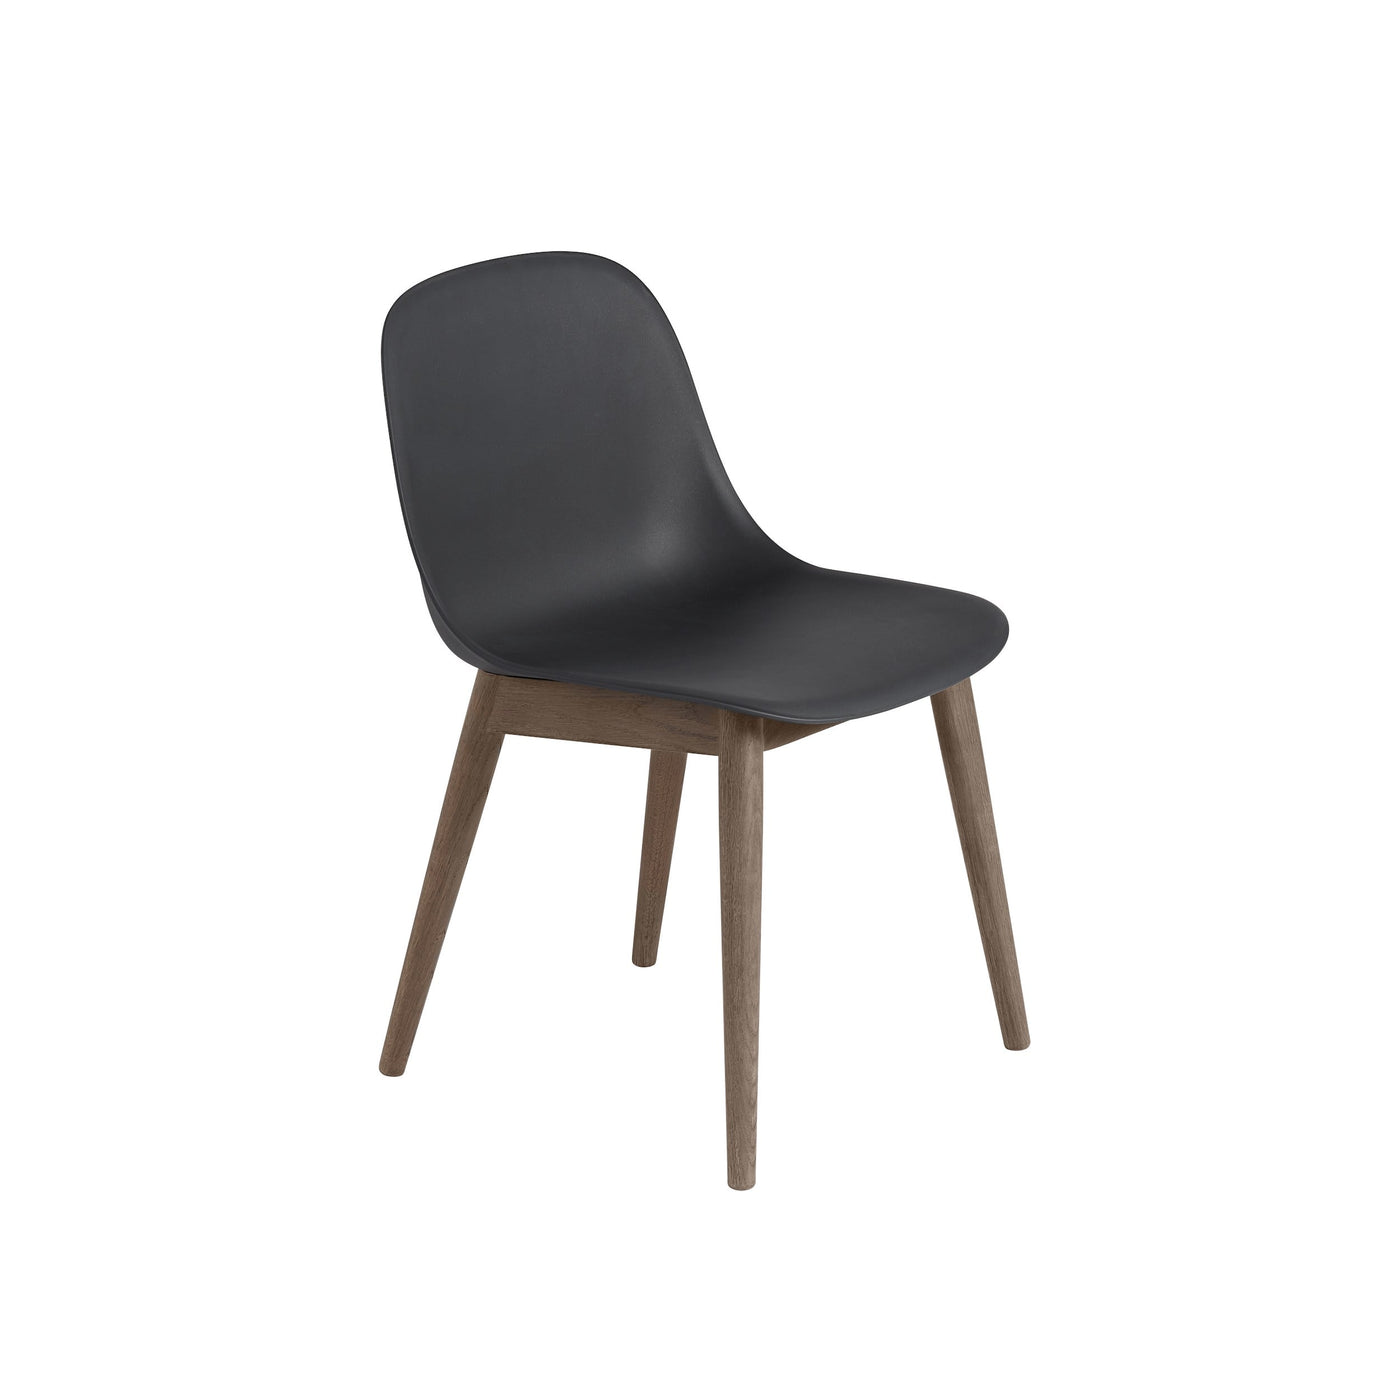 Muuto Fiber Side Chair stained dark brown wood base with a black seat. Shop online at someday designs. #colour_black